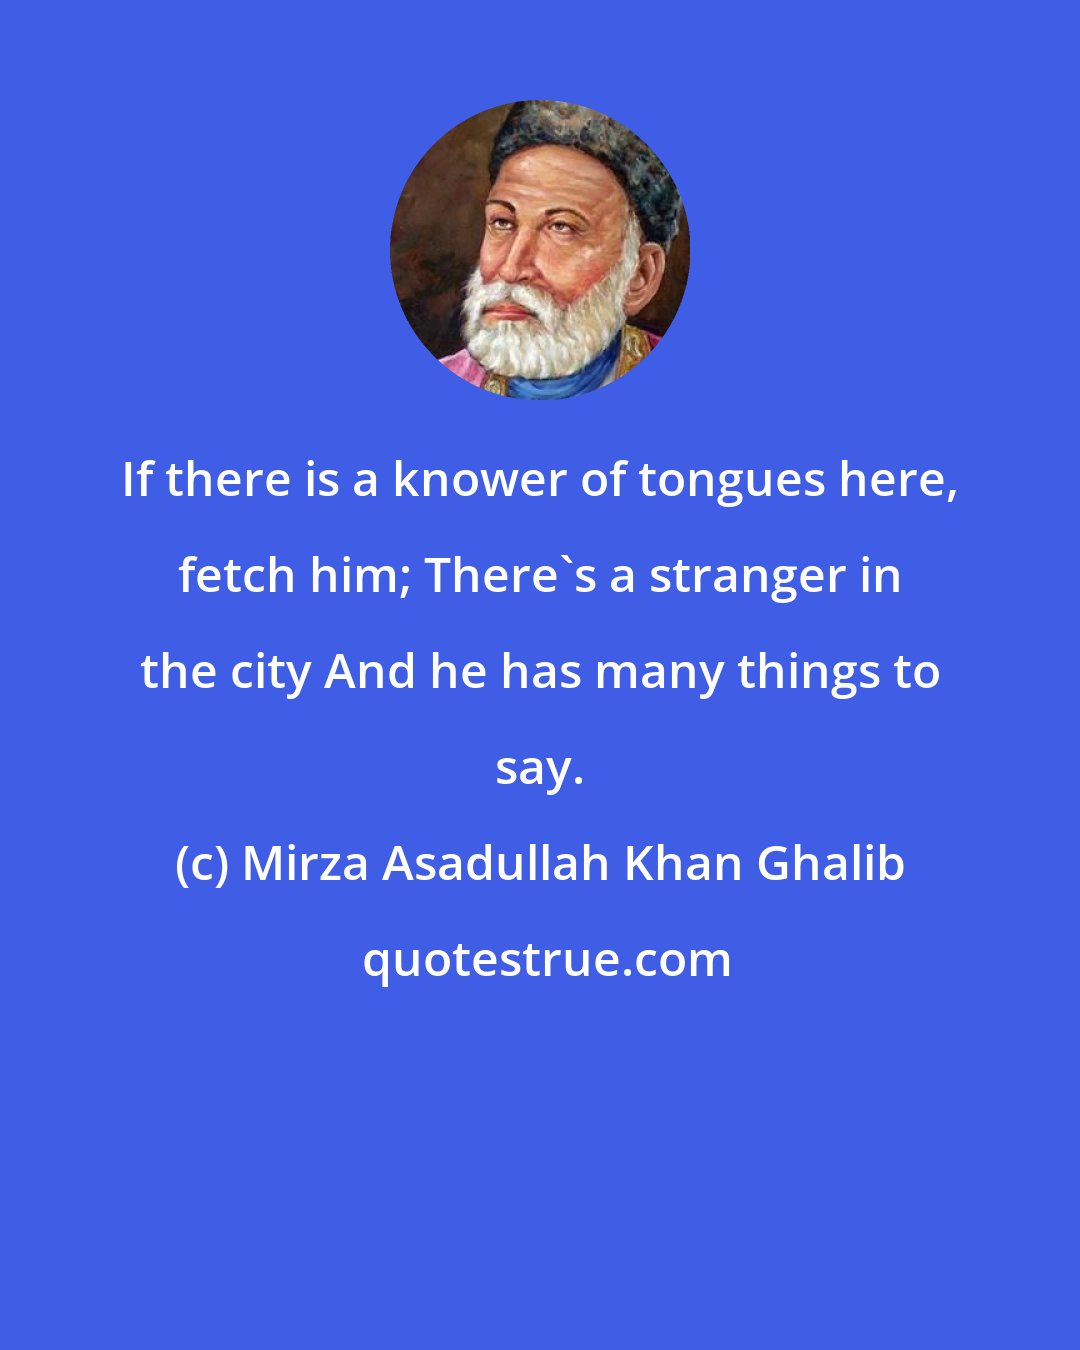 Mirza Asadullah Khan Ghalib: If there is a knower of tongues here, fetch him; There's a stranger in the city And he has many things to say.